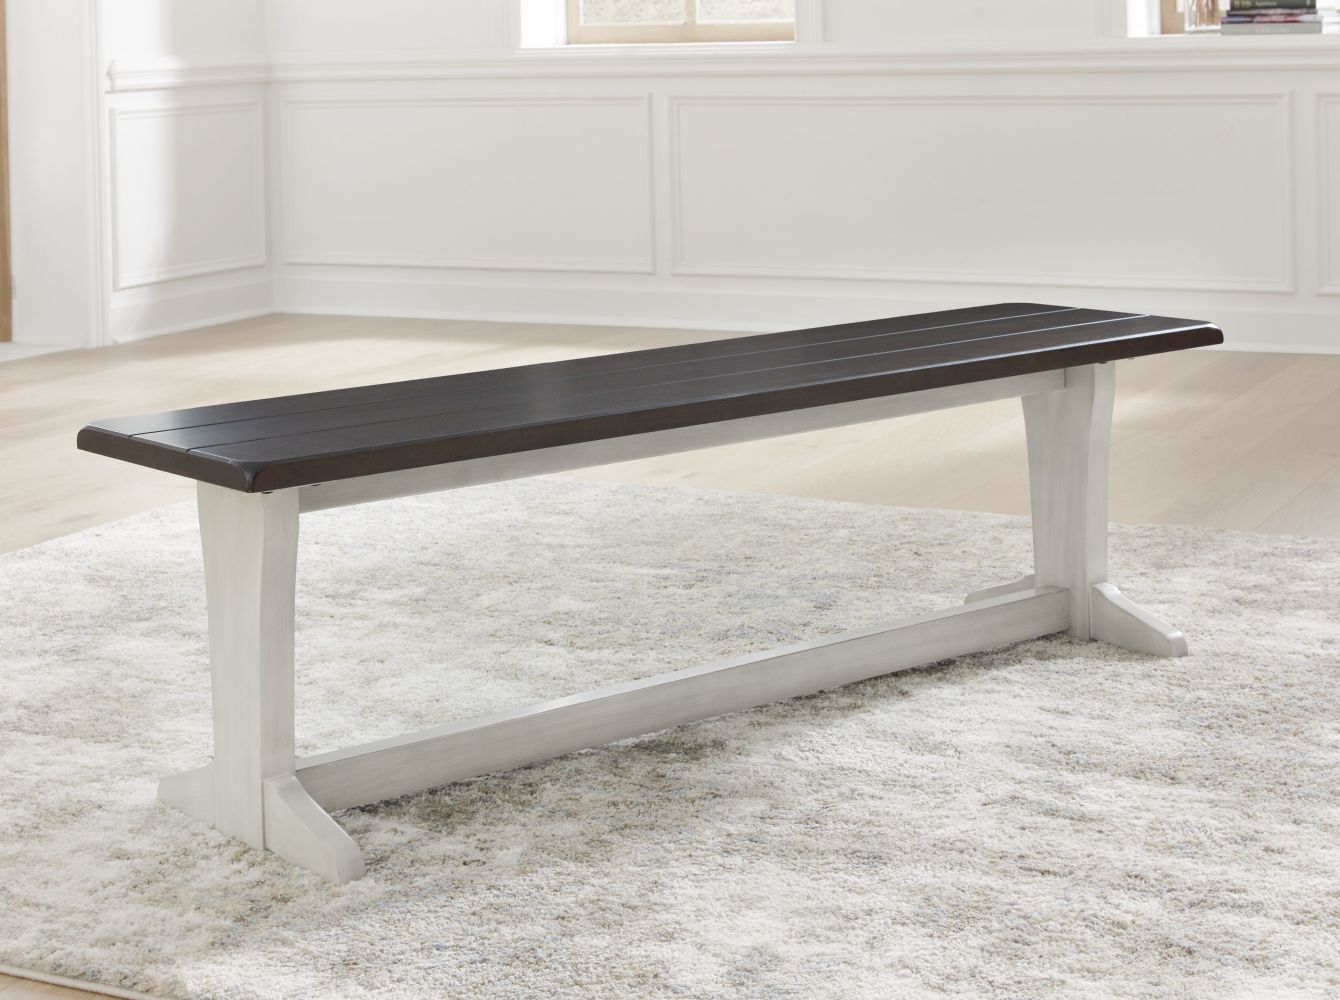 Darborn – Gray / Brown – Large Dining Room Bench D796-00